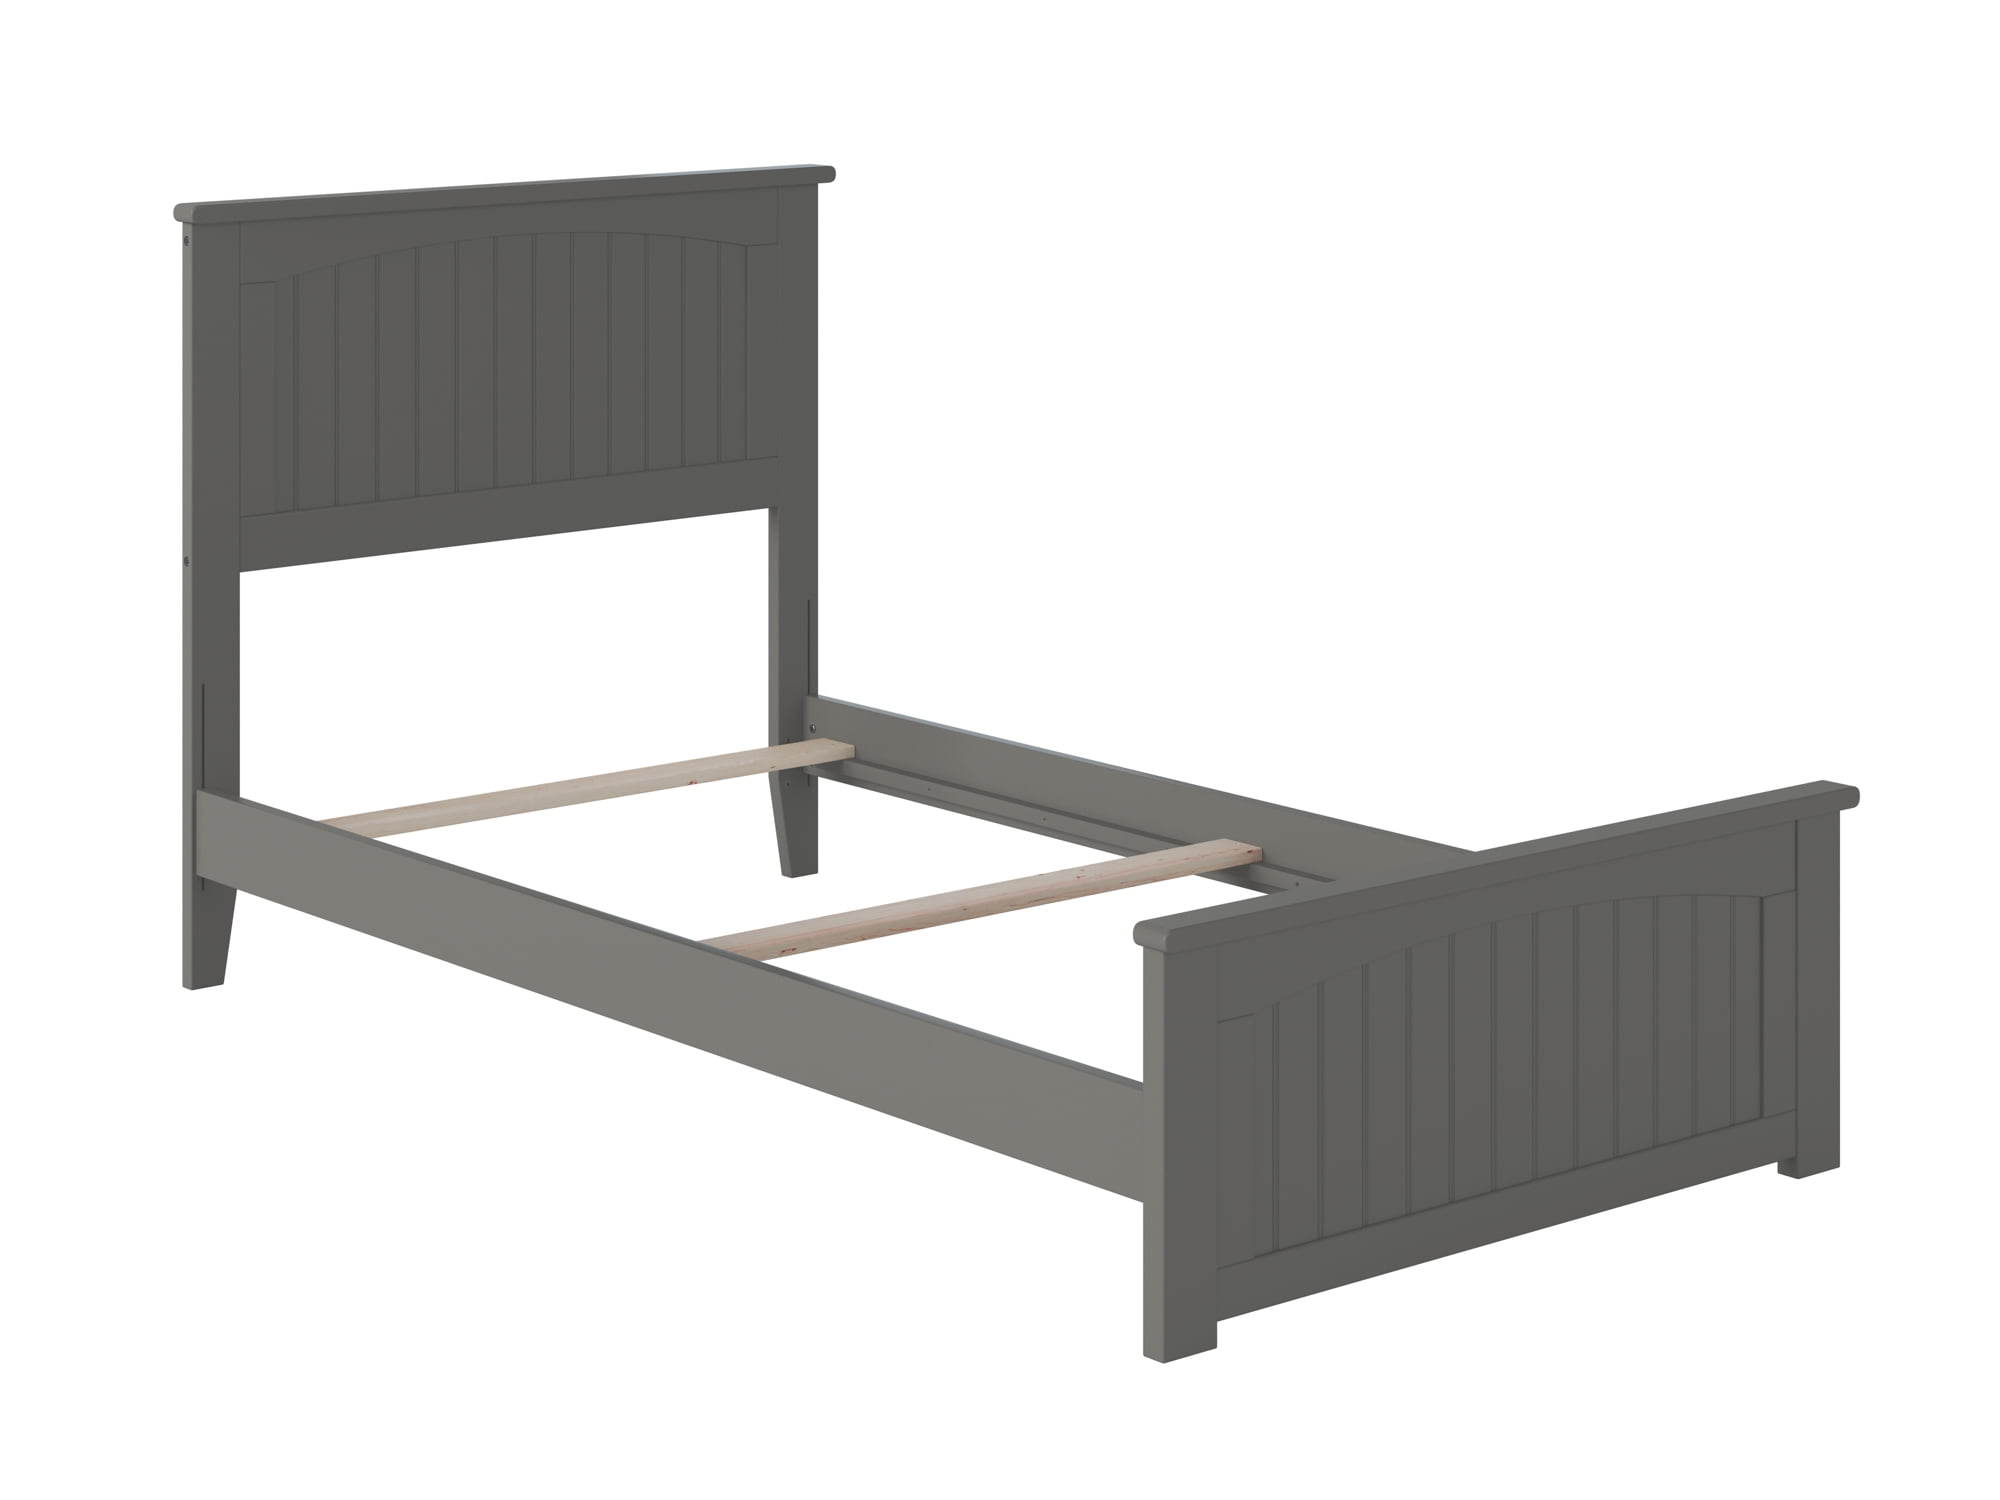 Ar8216039 Nantucket Twin Xl Traditional Bed With Matching Foot Board - Grey